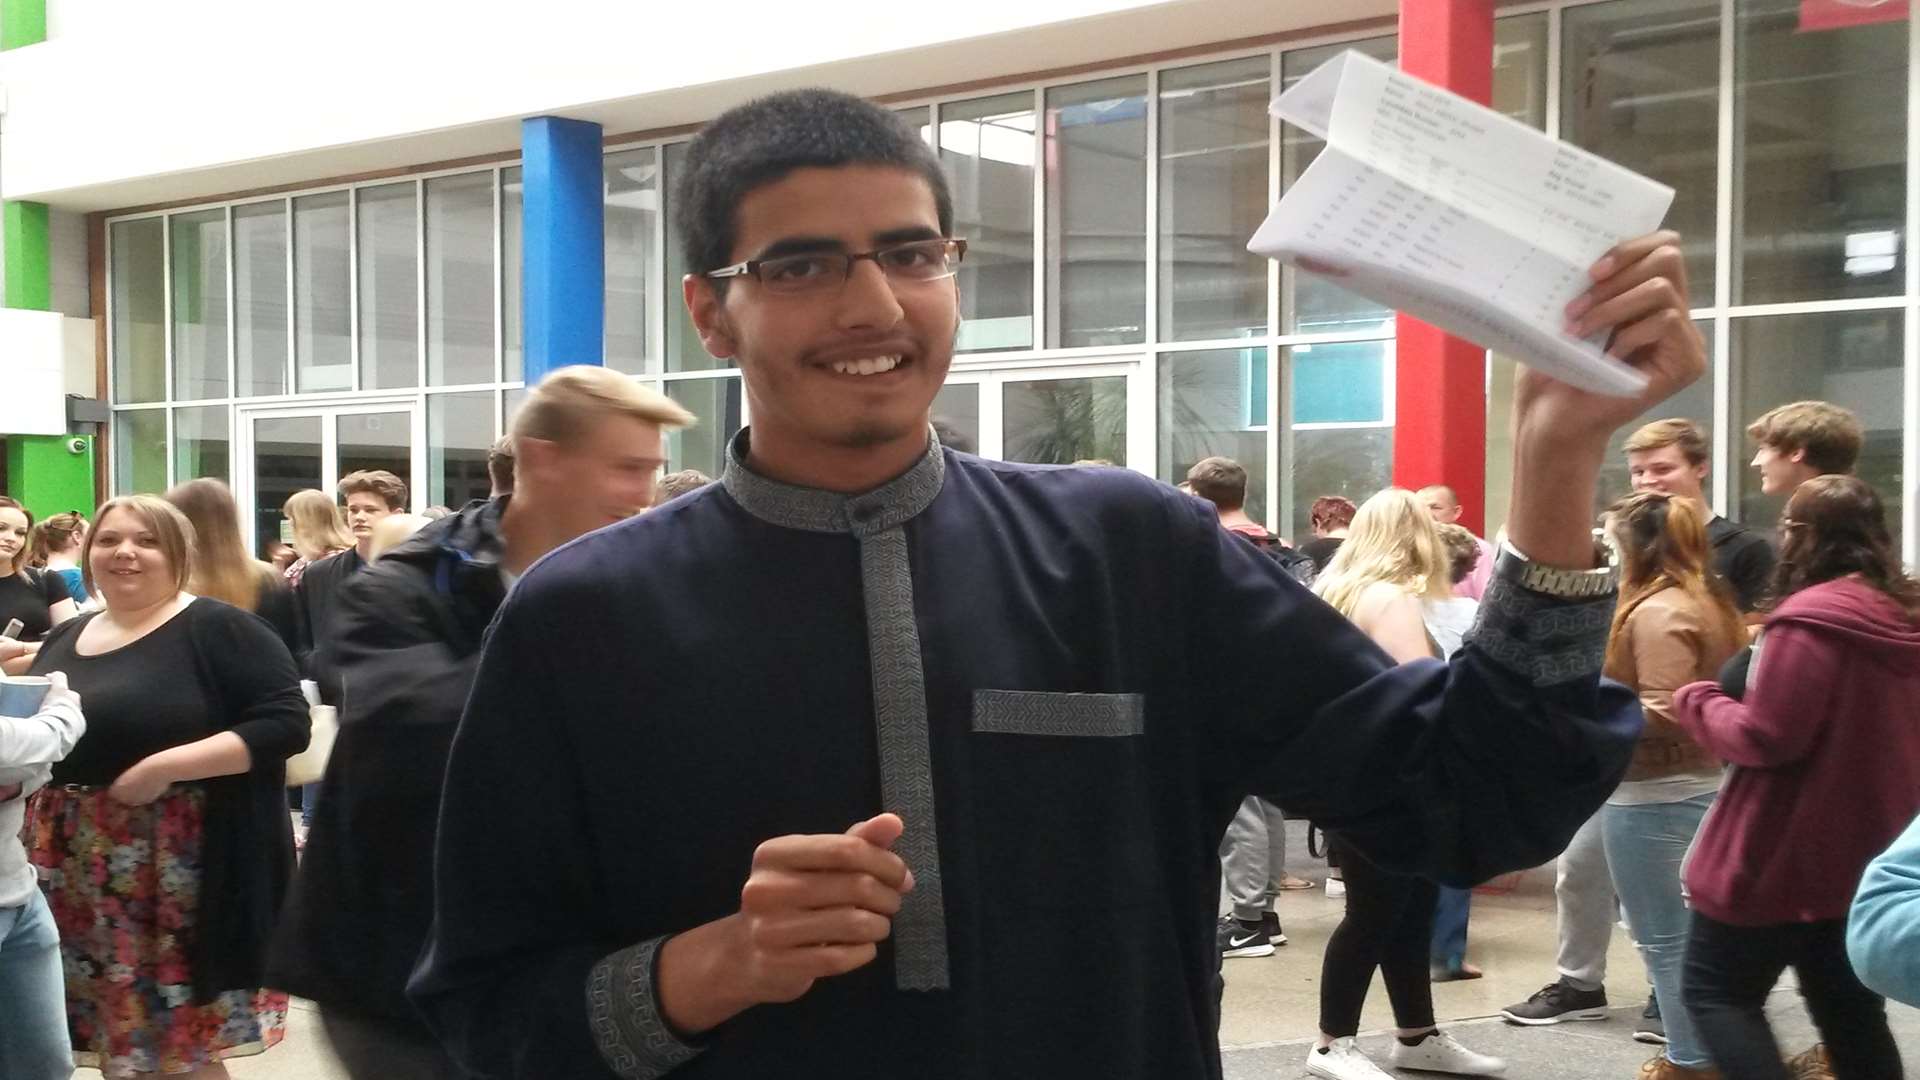 Abdul Mueed with his results at The Charles Dickens School